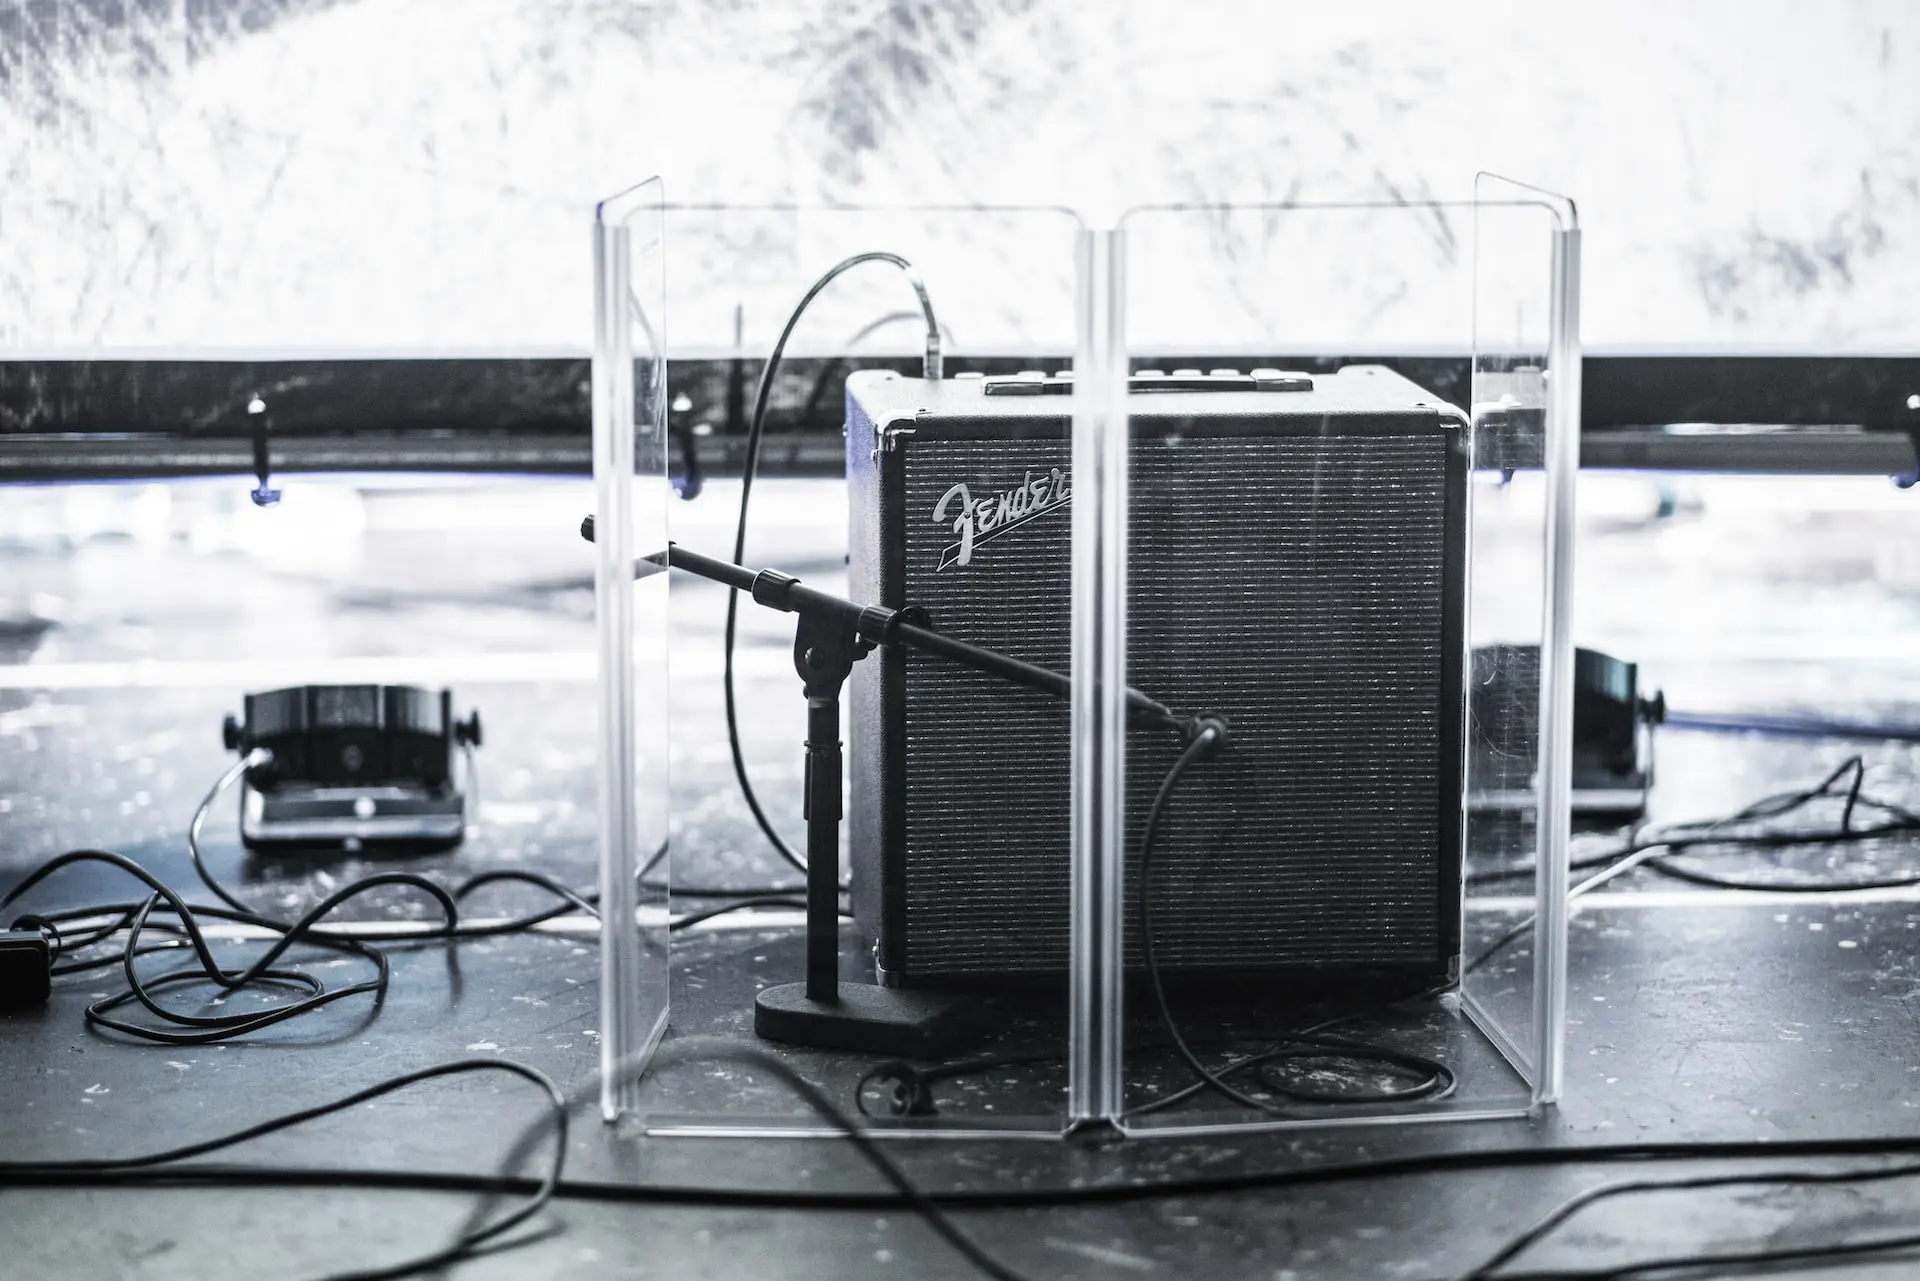 Covering Guitar Amp: Will Dust Damage It? (Taking Care Of Amp)